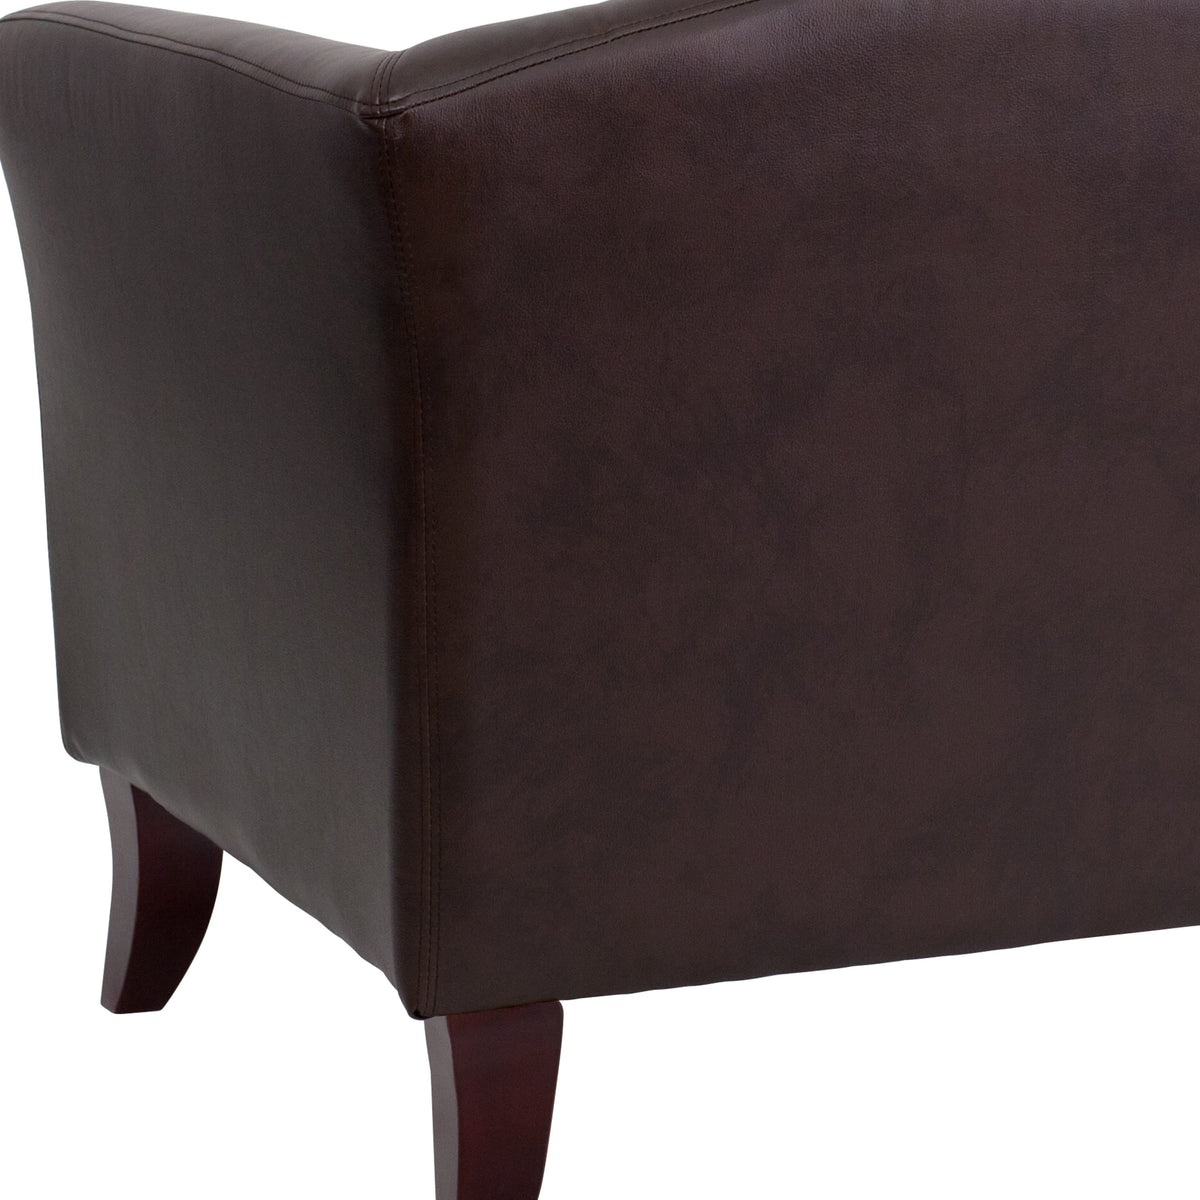 Brown |#| Brown LeatherSoft Loveseat w/Cherry Wood Feet - Reception or Home Office Seating